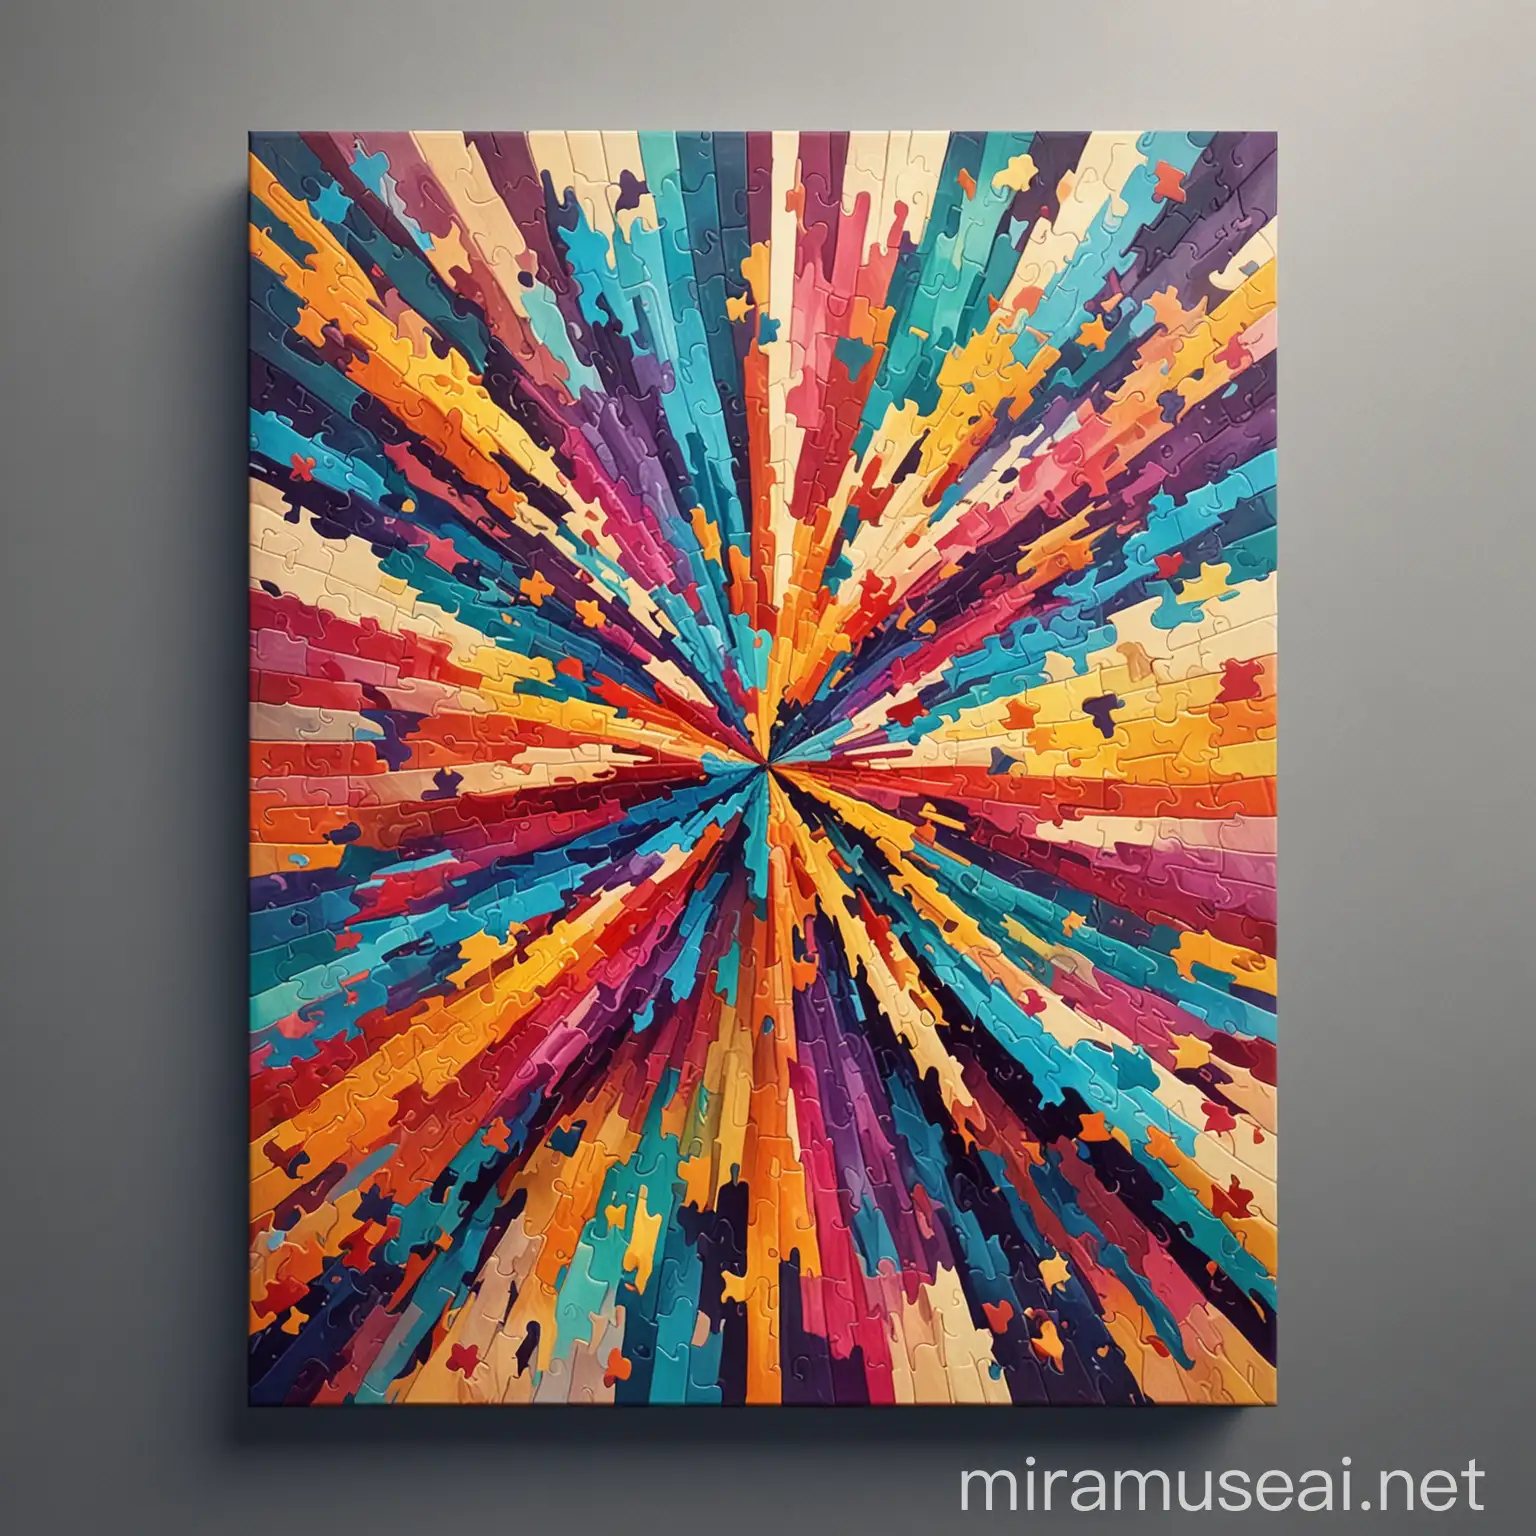 create colorful abstract art image for puzzle poster